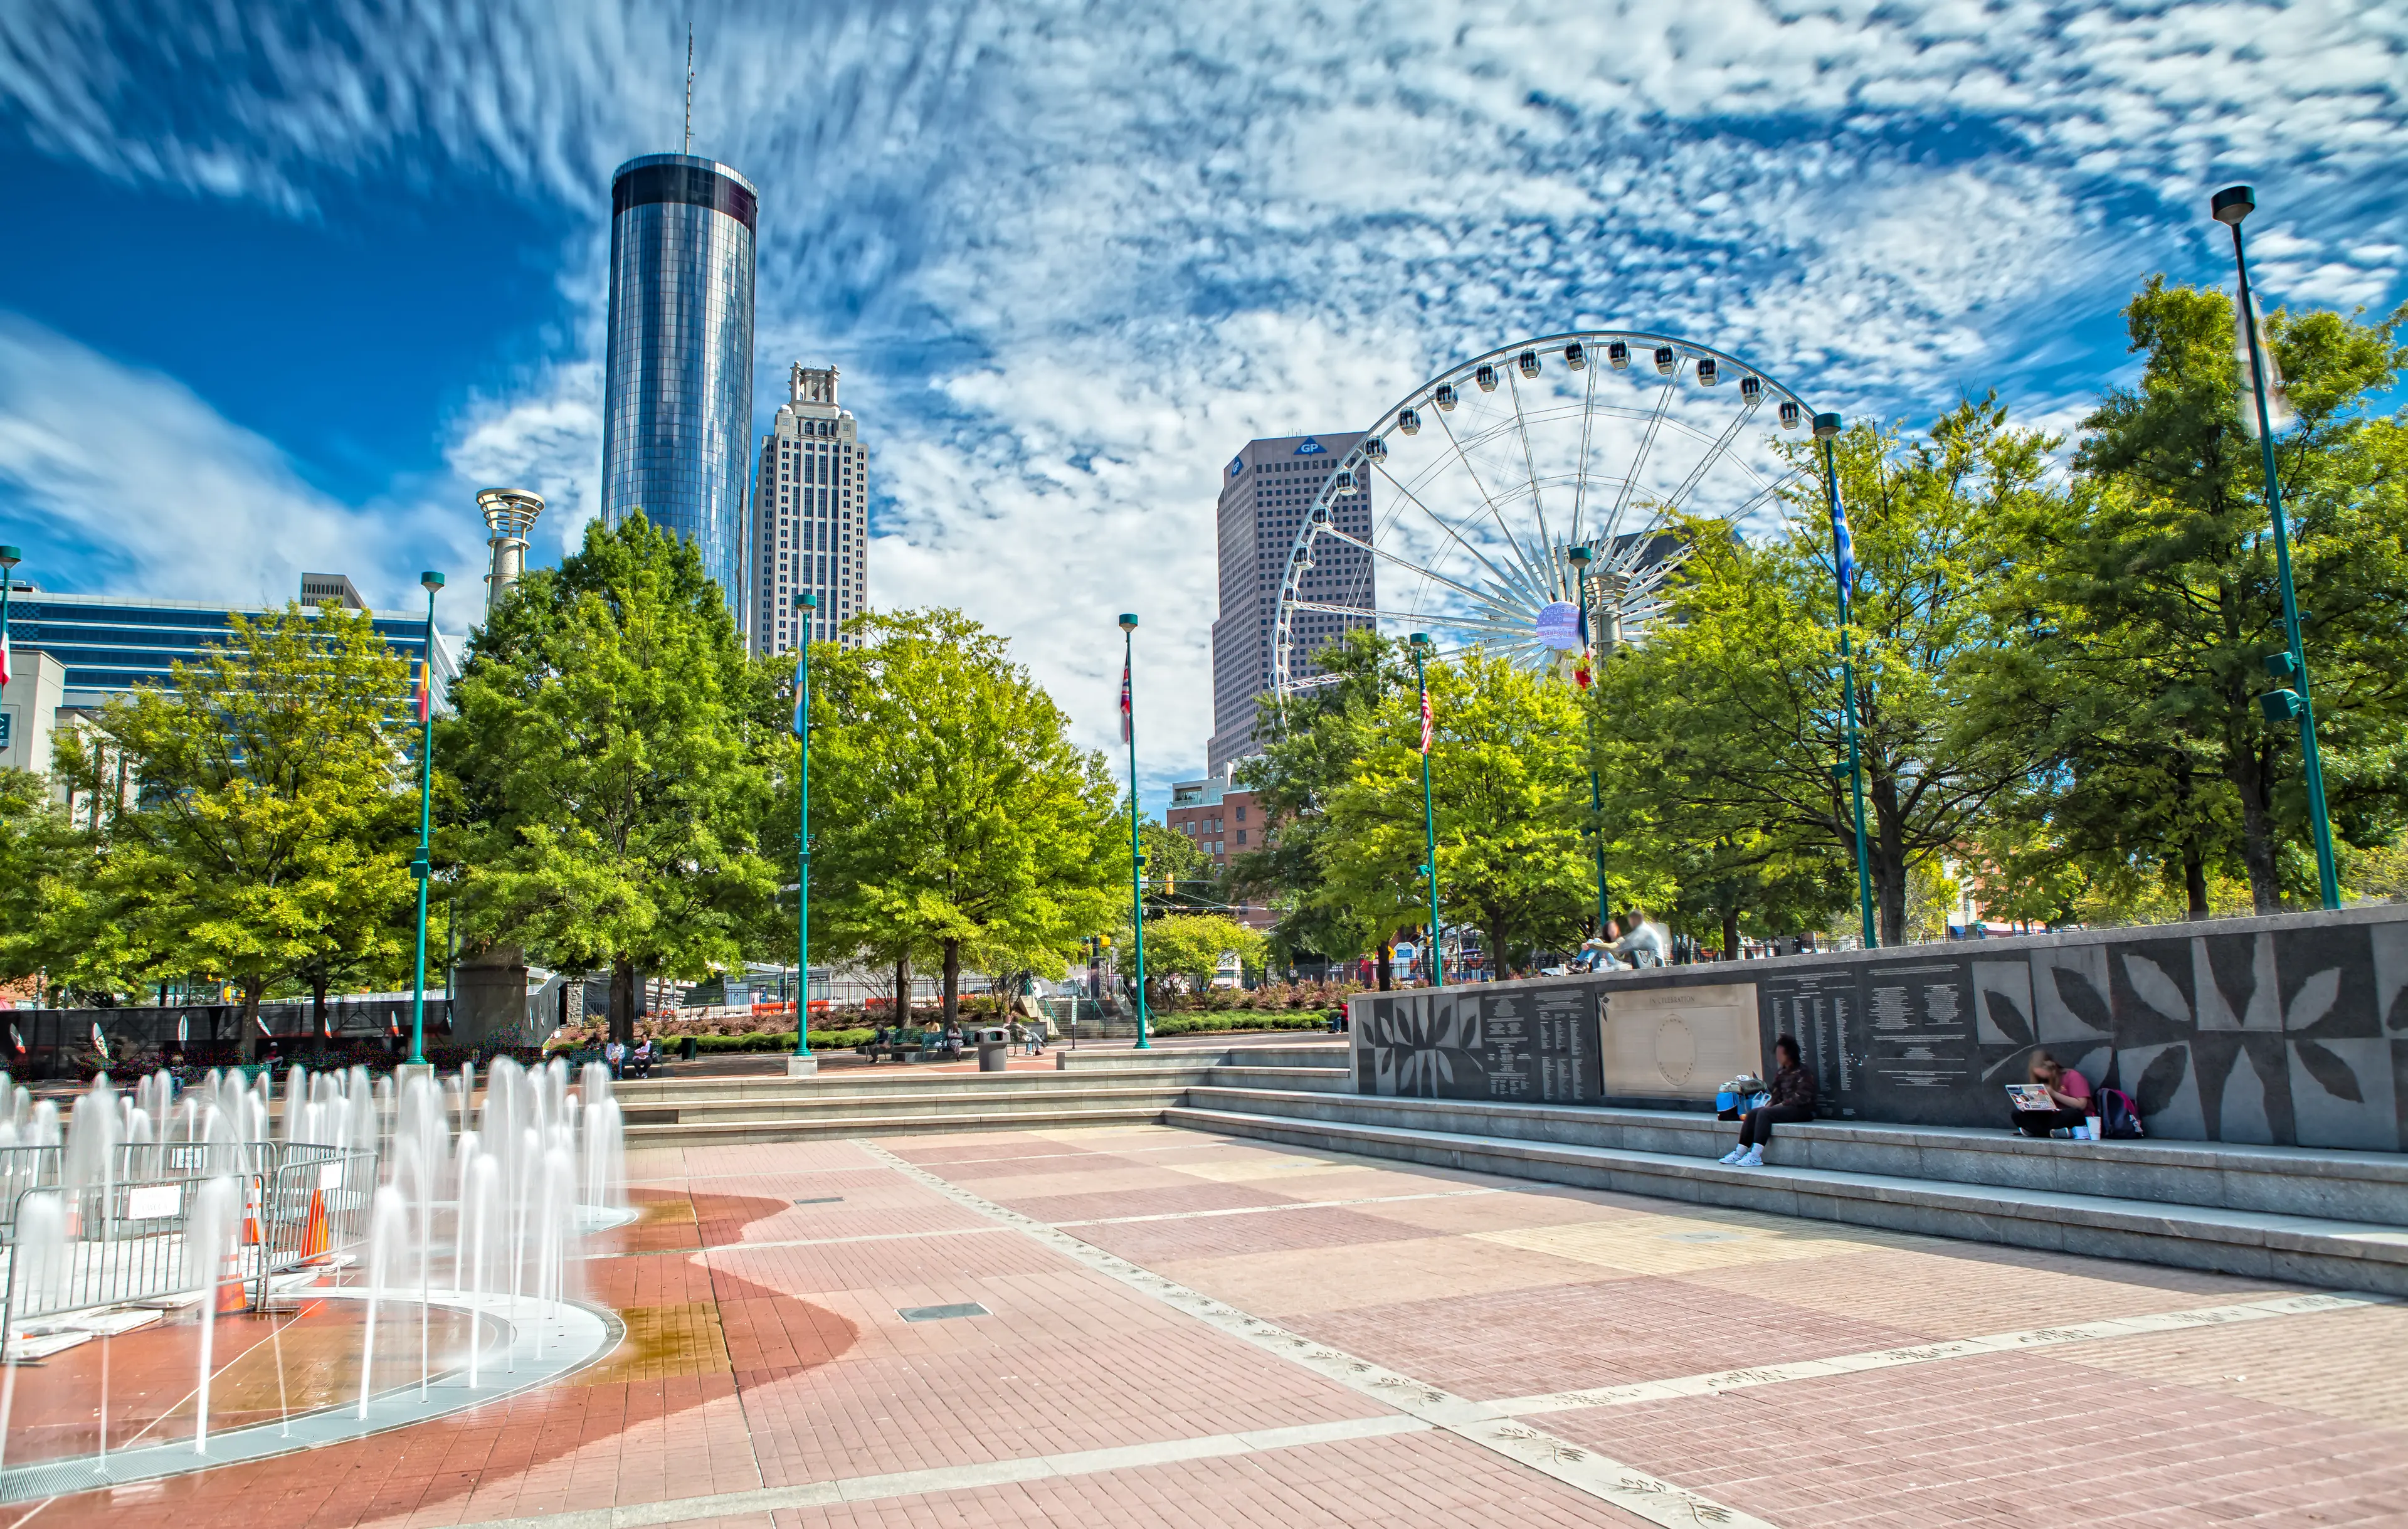 4-Day Family Adventure & Shopping Experience in Atlanta for Locals